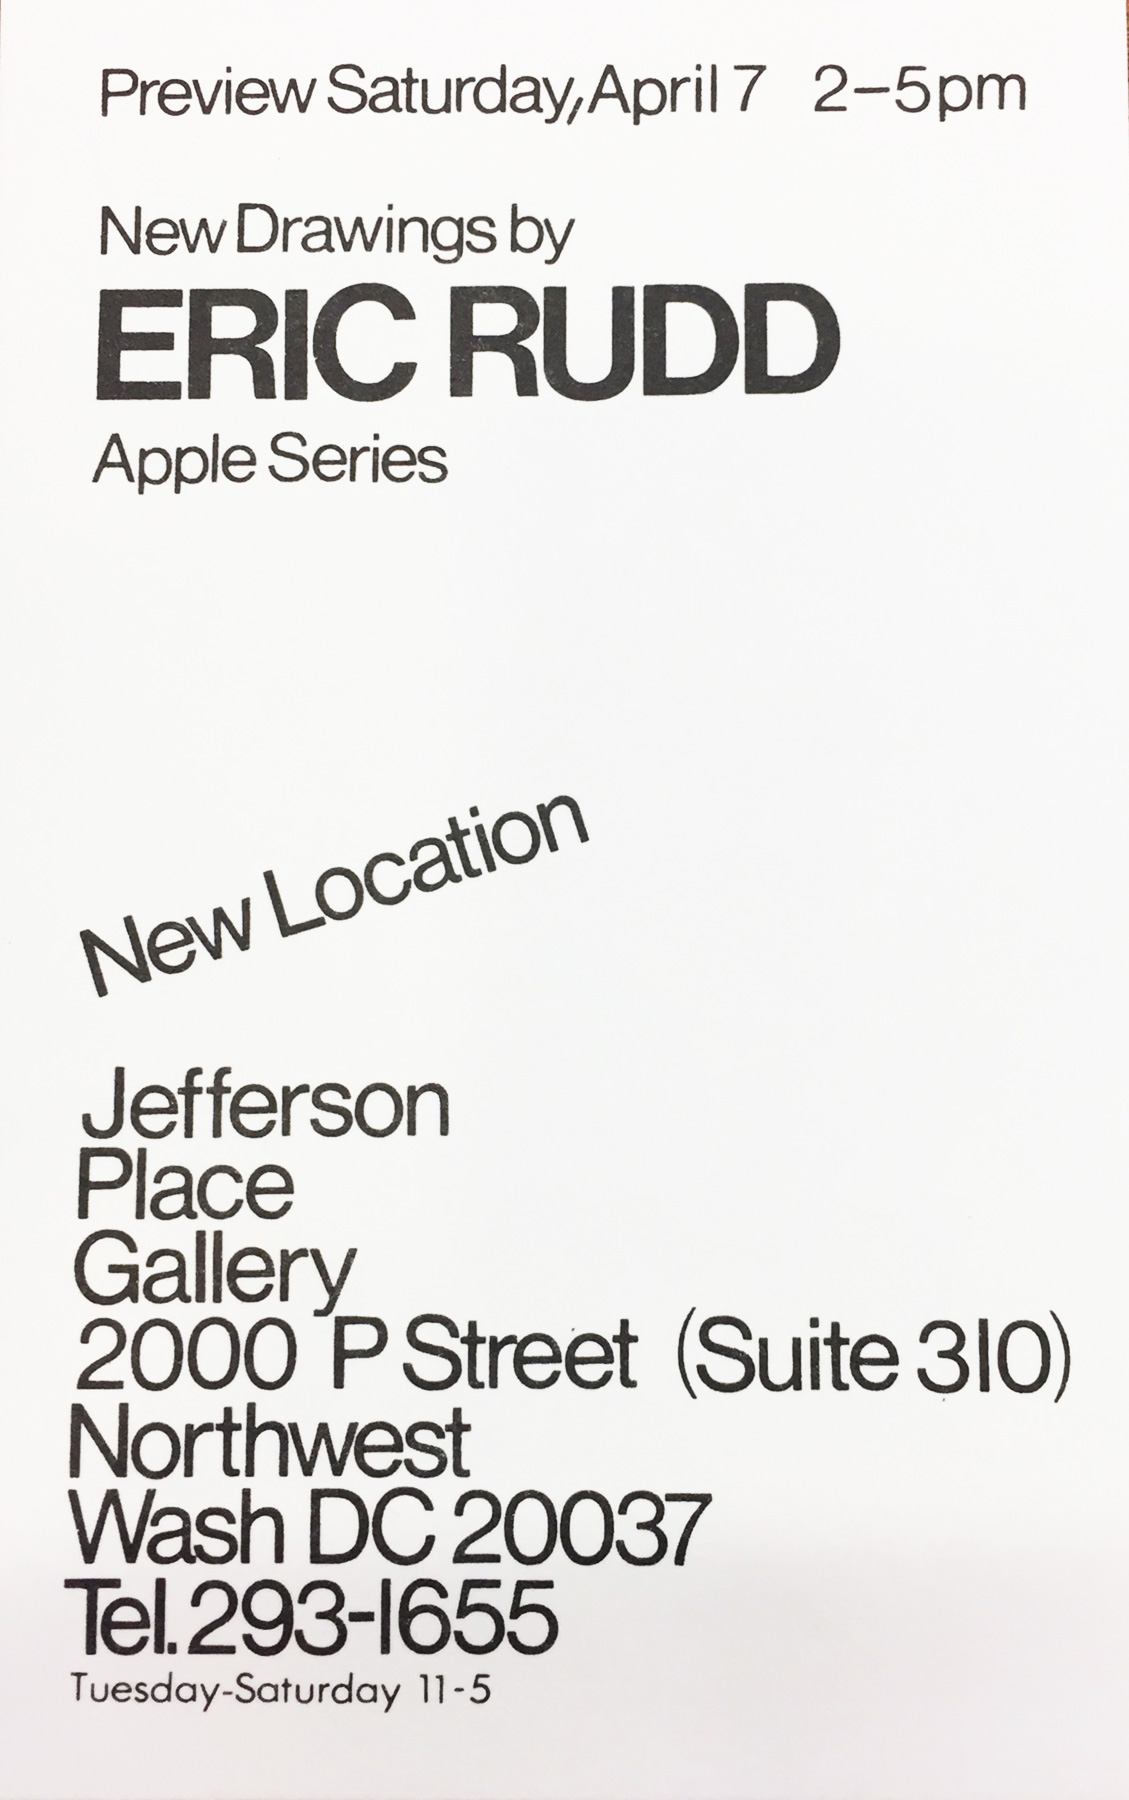 Announcement card for Eric Rudd at Jefferson Place Gallery